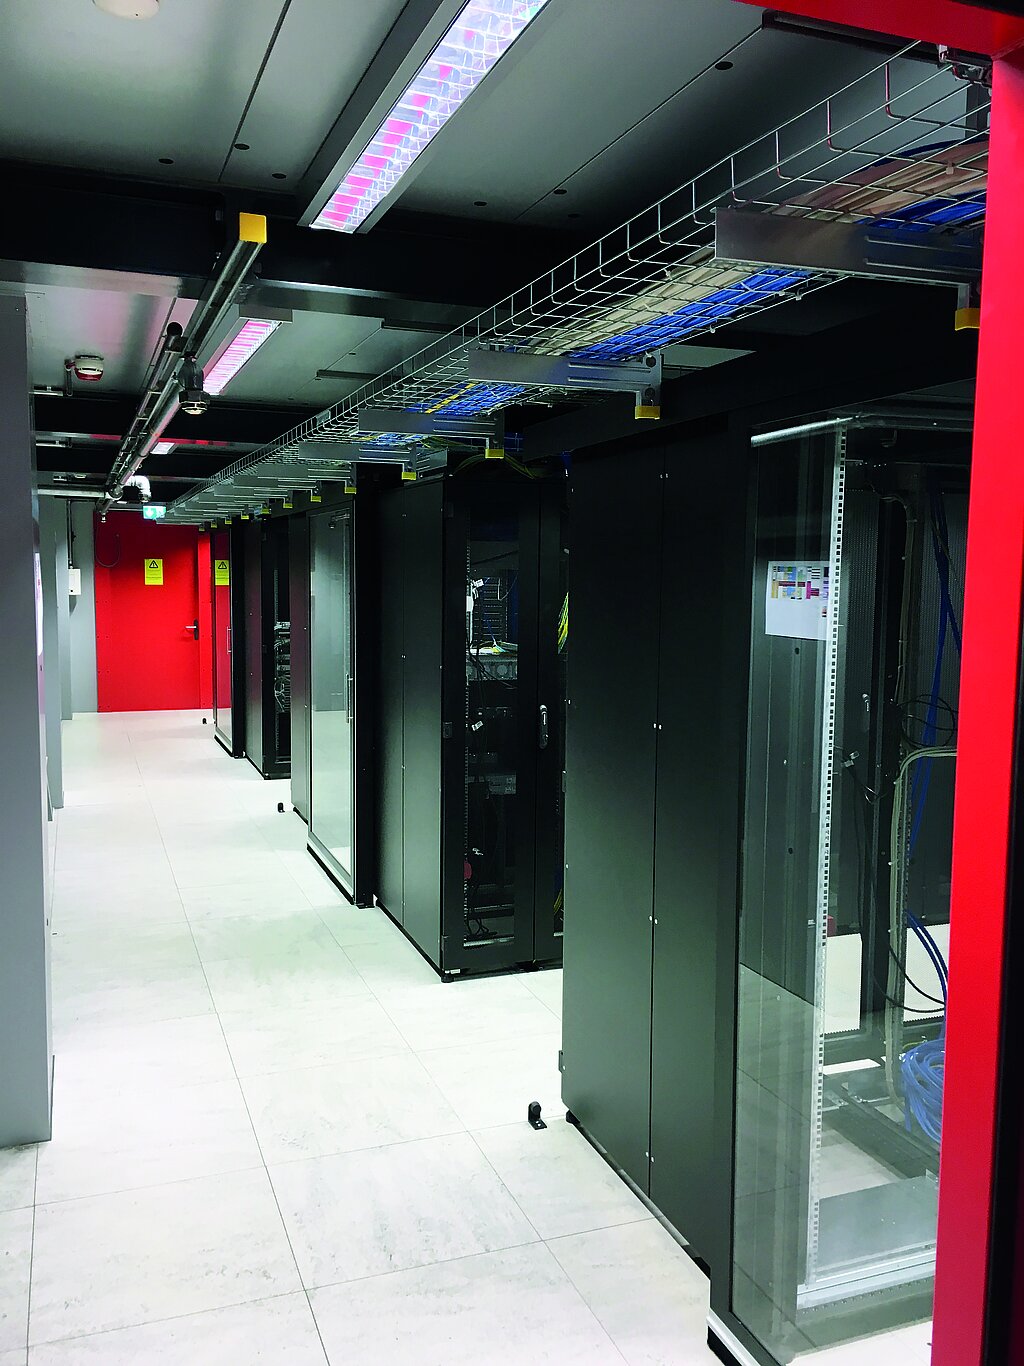 Cabinets on the right, in the background red door to the data center